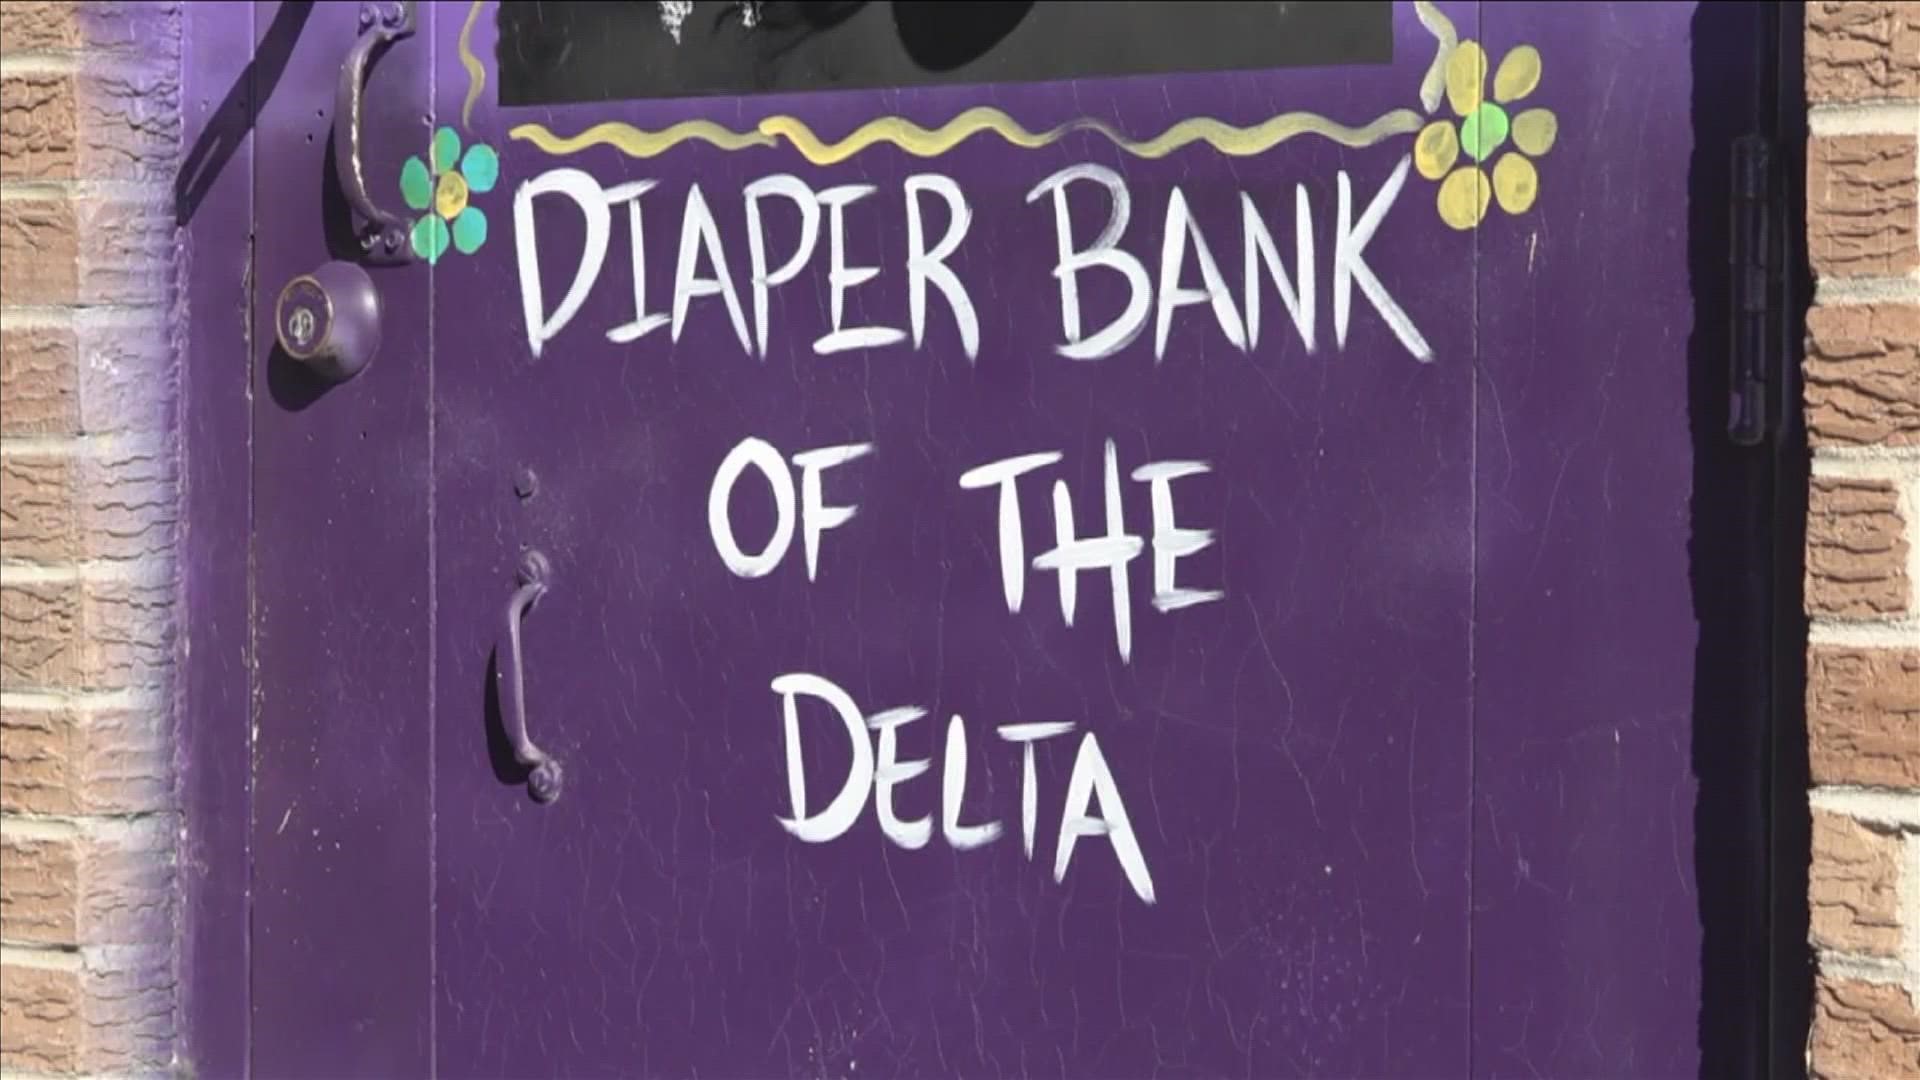 “The diaper bank is a basic need bank. To end diaper-need and period poverty," said Chelsea Presley, co-founder & Executive Director of the Diaper Bank of the Delta.